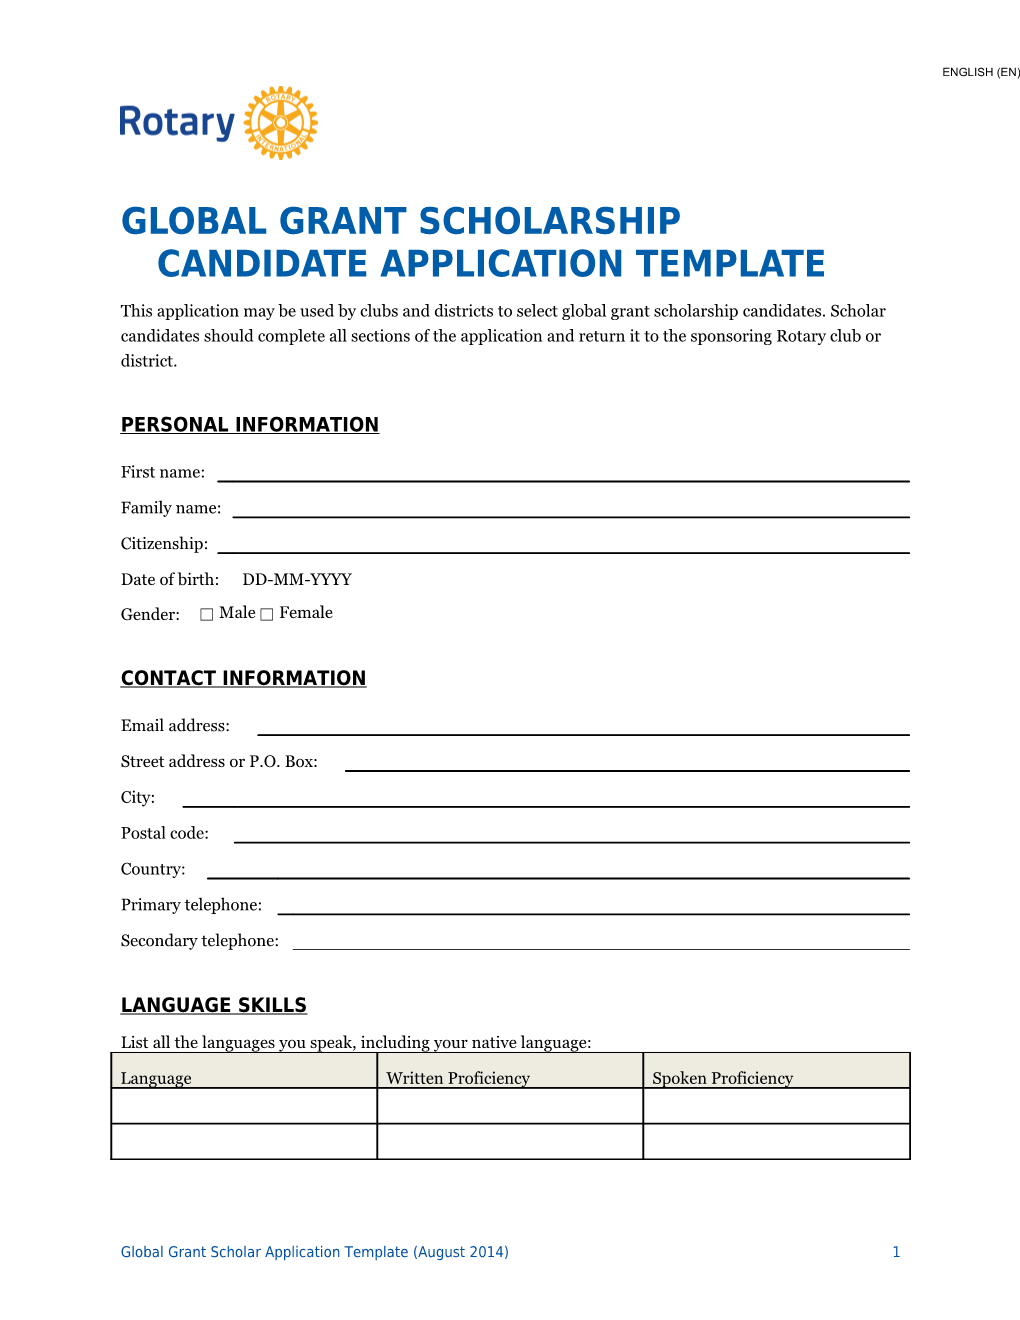 Global Grant Scholarship CANDIDATE Application Template